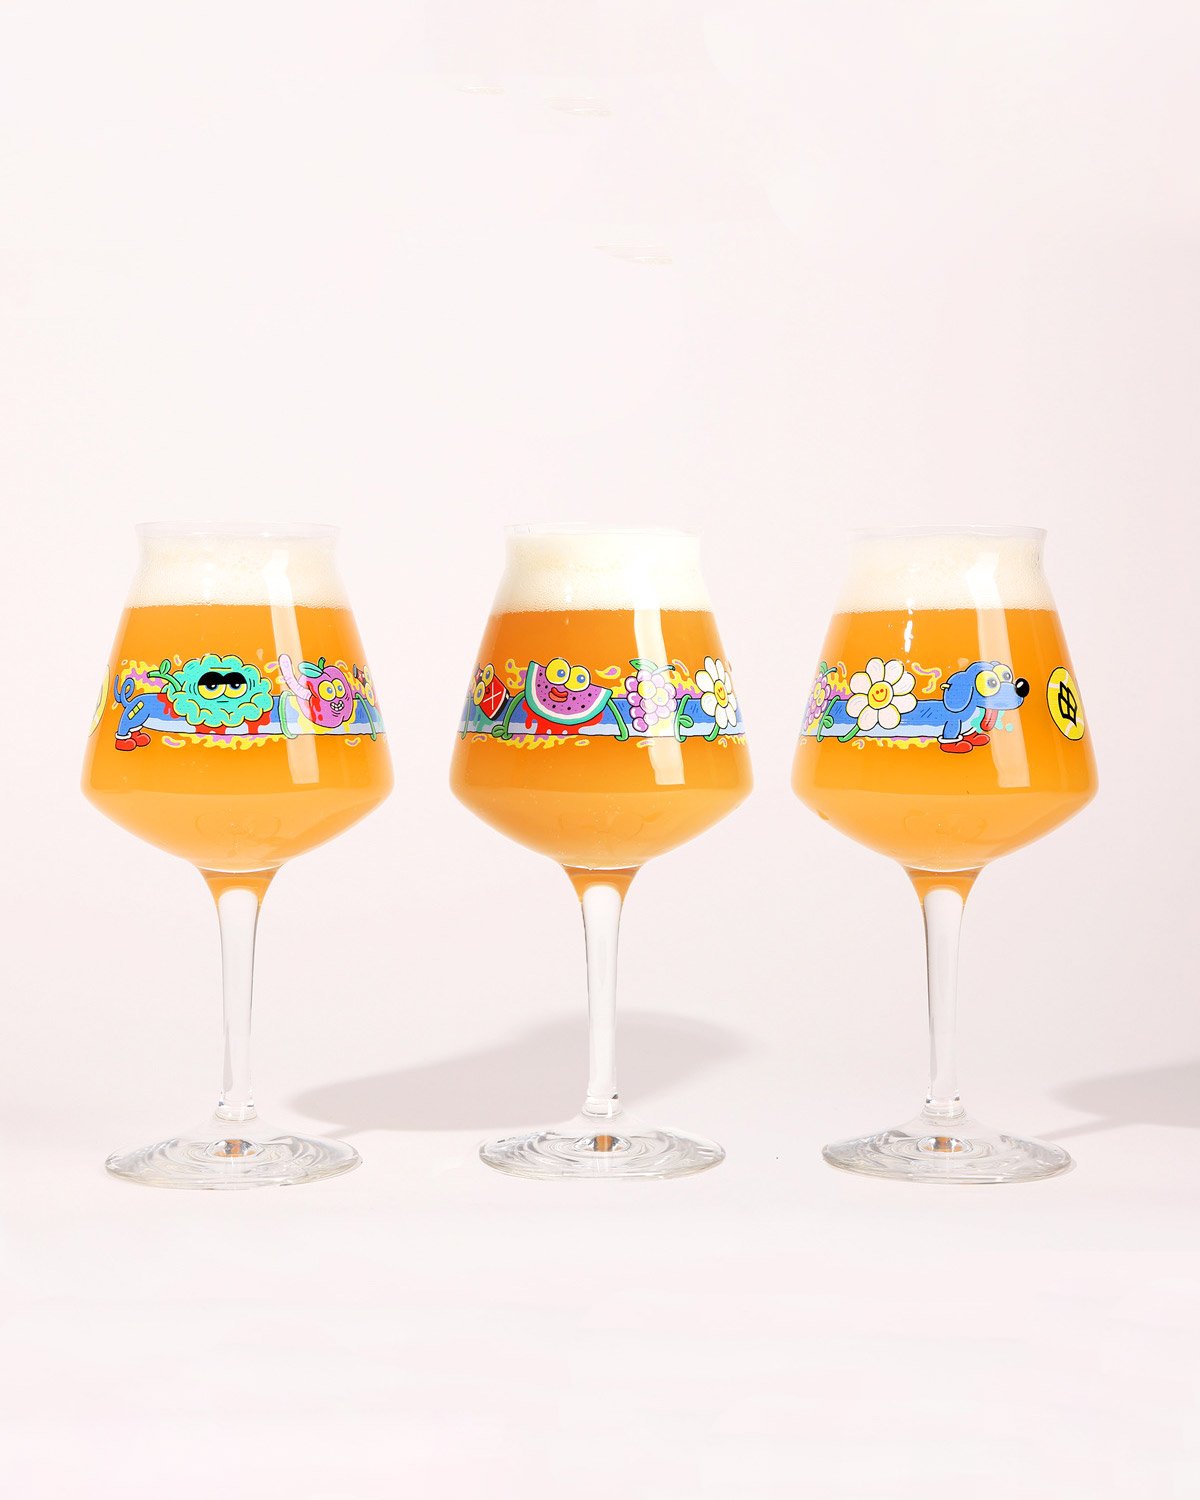 Top 8 Glasses to Give Your Beer Loving Friends • Hop Culture